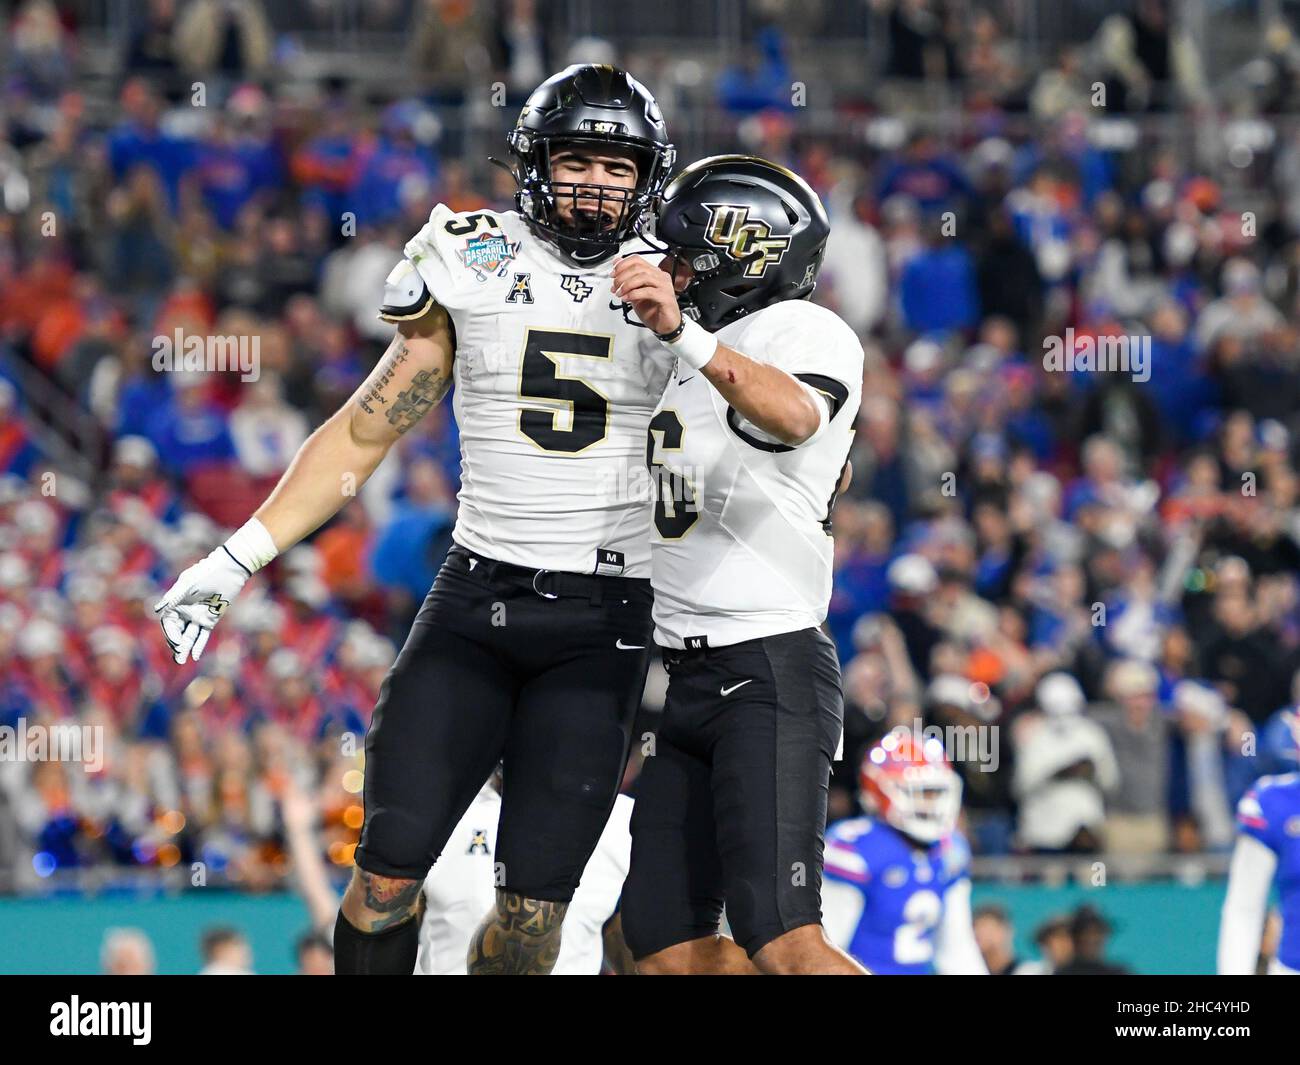 Tampa, FL, USA. 23rd Dec, 2021. UCF Knights running back Isaiah Bowser (5) celebrates after scoring with quarterback Mikey Keene (16) during the 1st half of Union Home Mortgage Gasparilla Bowl between the Florida Gators and the UCF Knights at Raymond James Stadium in Tampa, FL. Romeo T Guzman/CSM/Alamy Live News Stock Photo